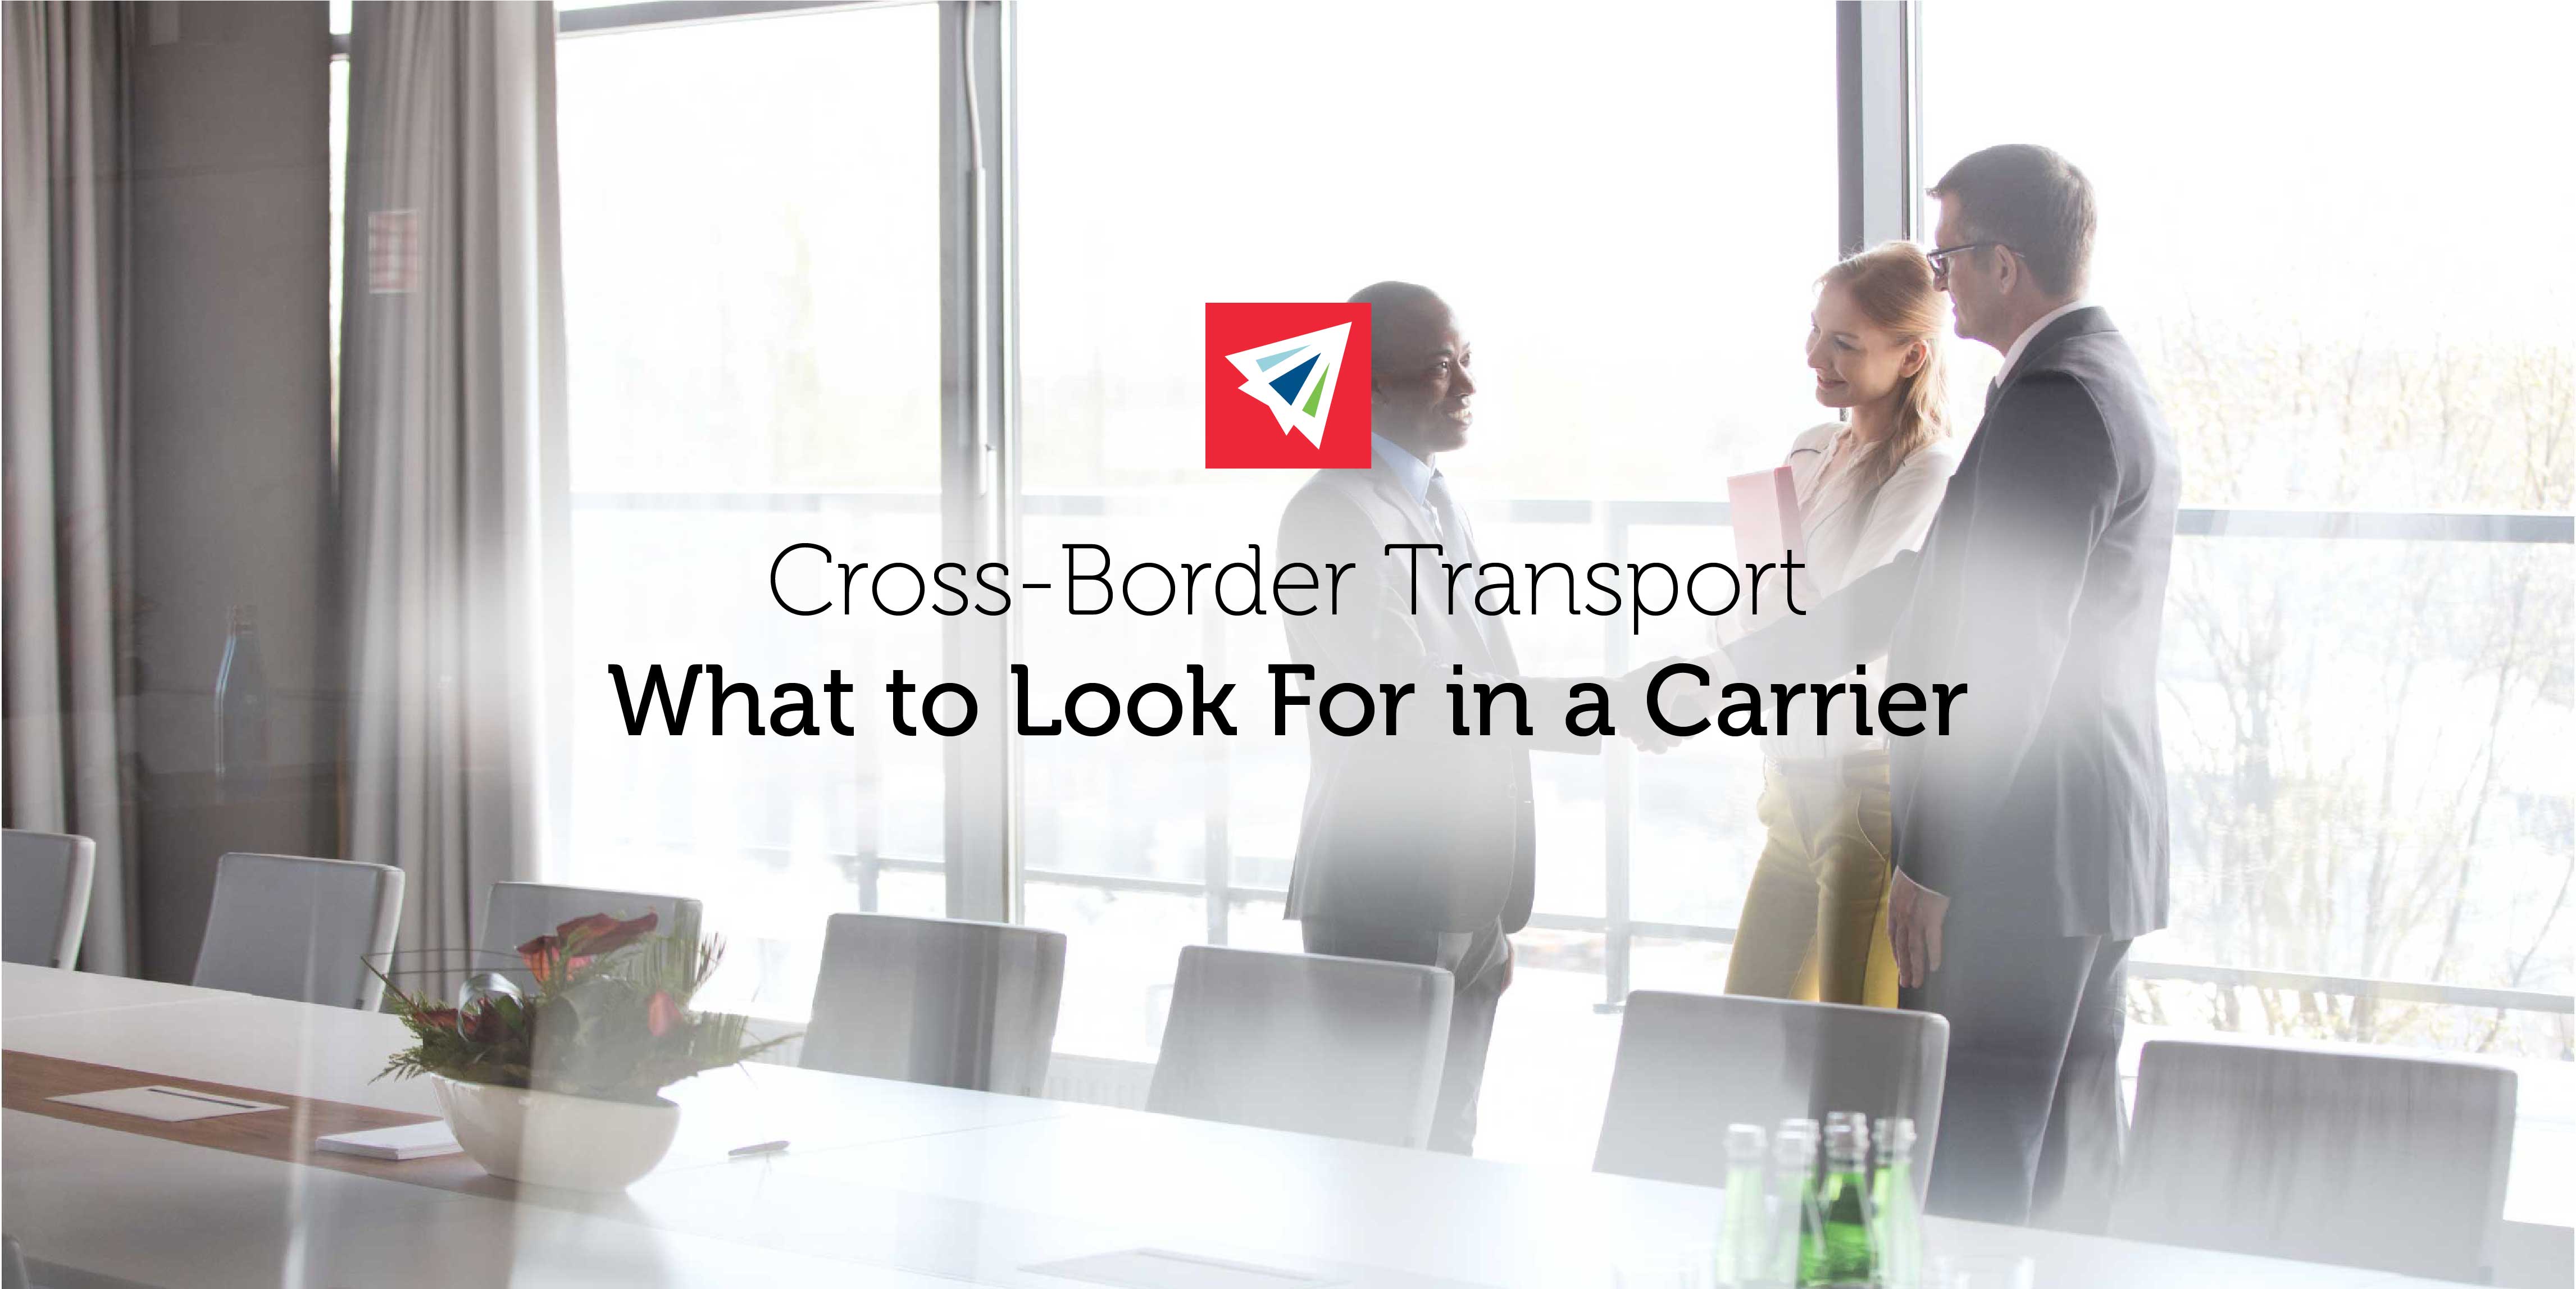 Cross-Border Transport: What to Look For in a Carrier